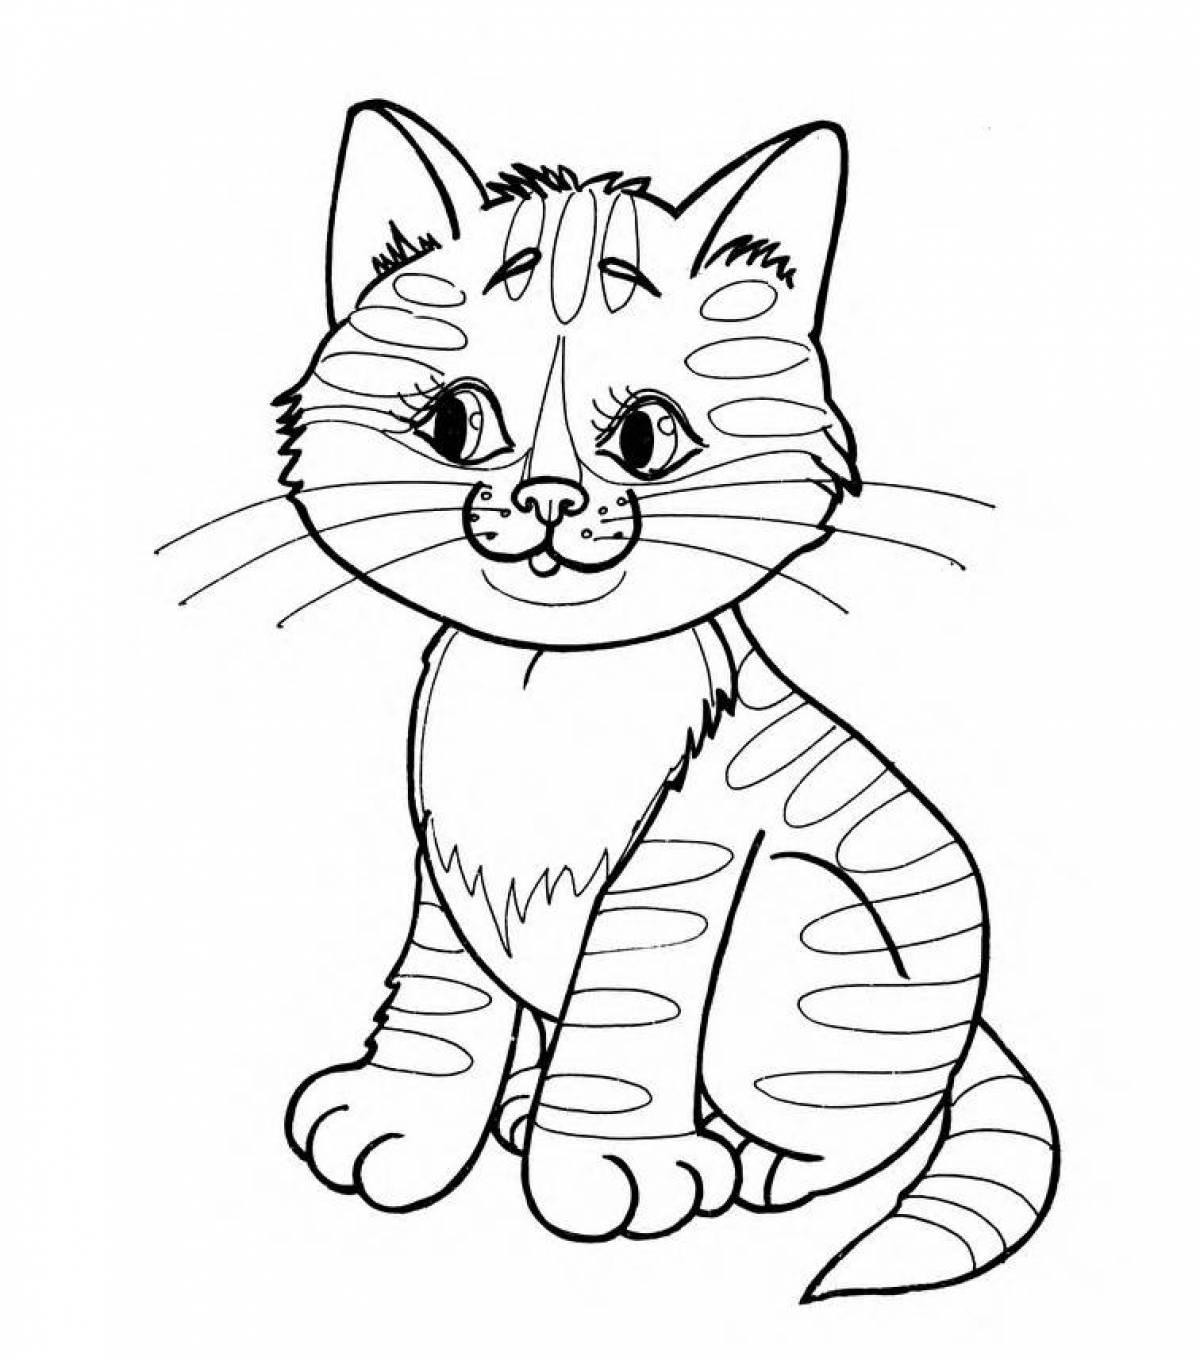 Adorable cat coloring book for kids 3-4 years old